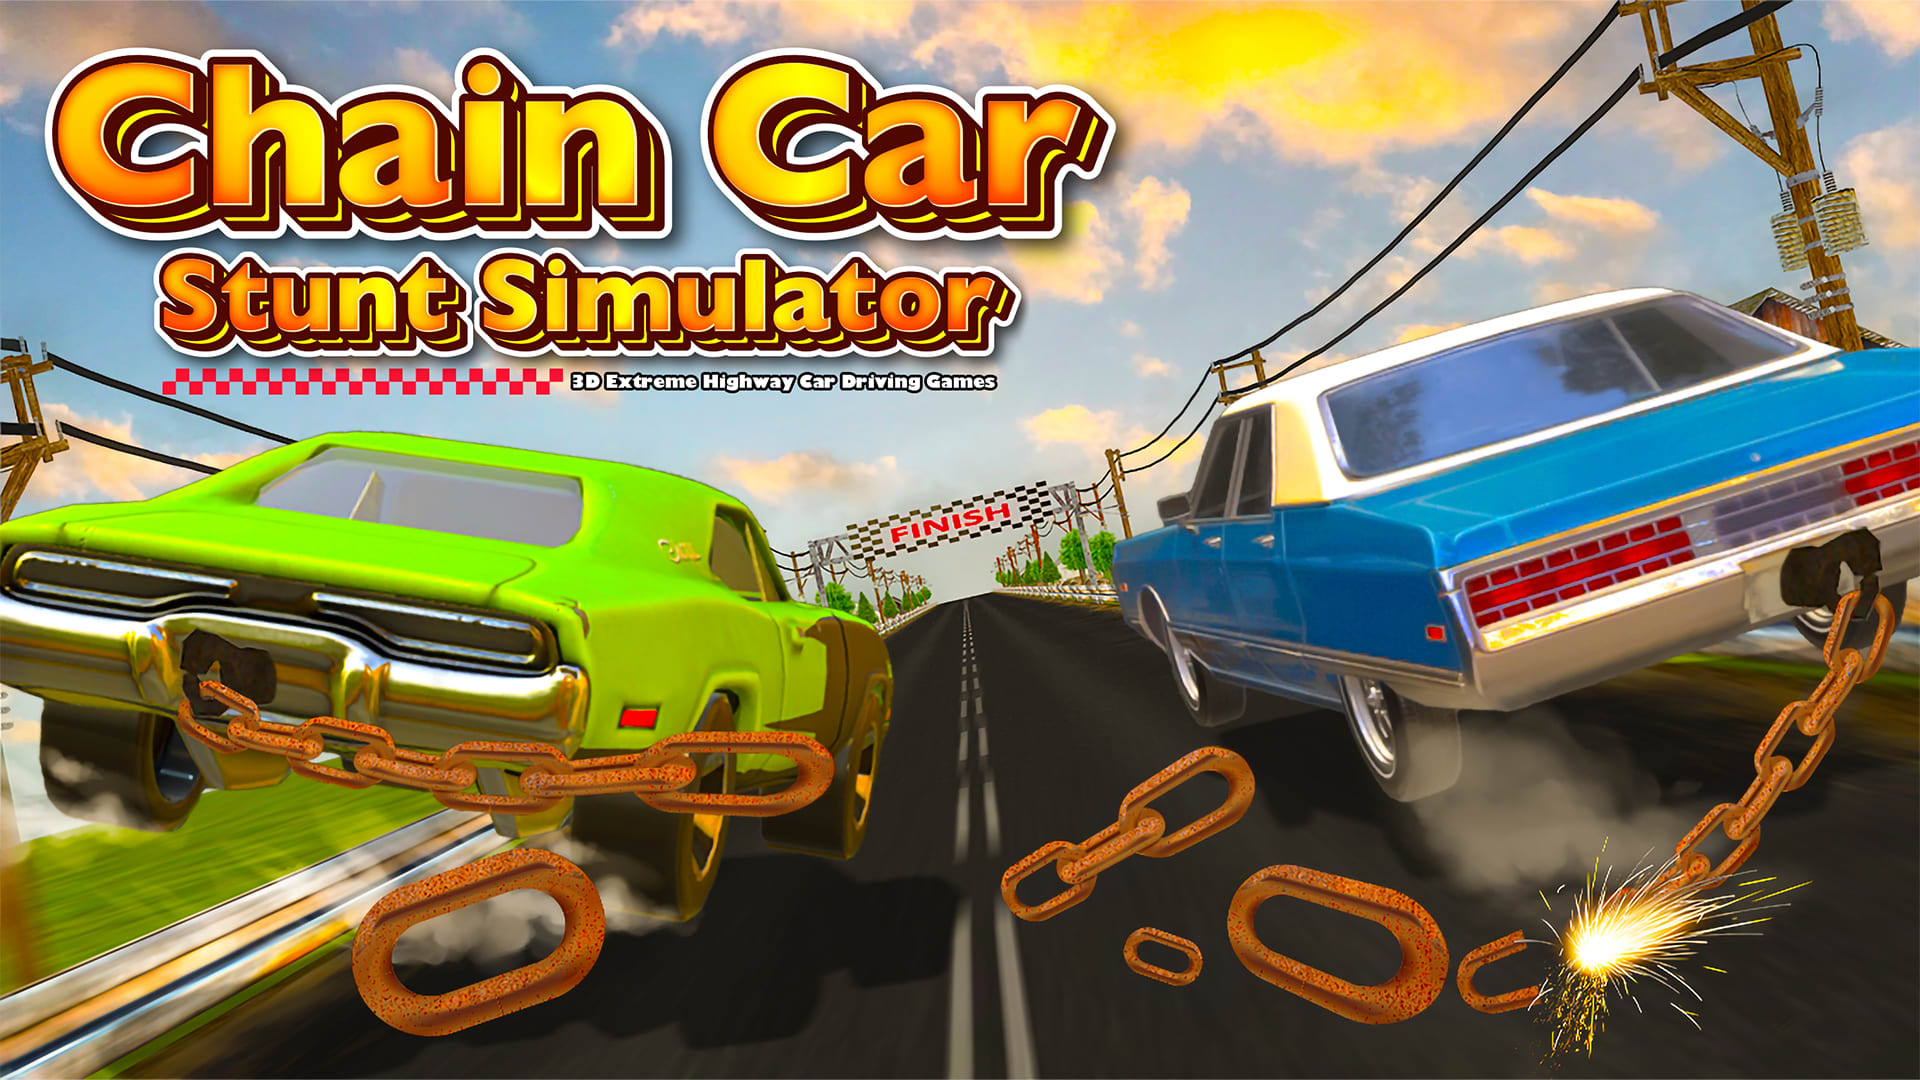 Chain Car Stunt Simulator - 3D Extreme Highway Car Driving Games 1